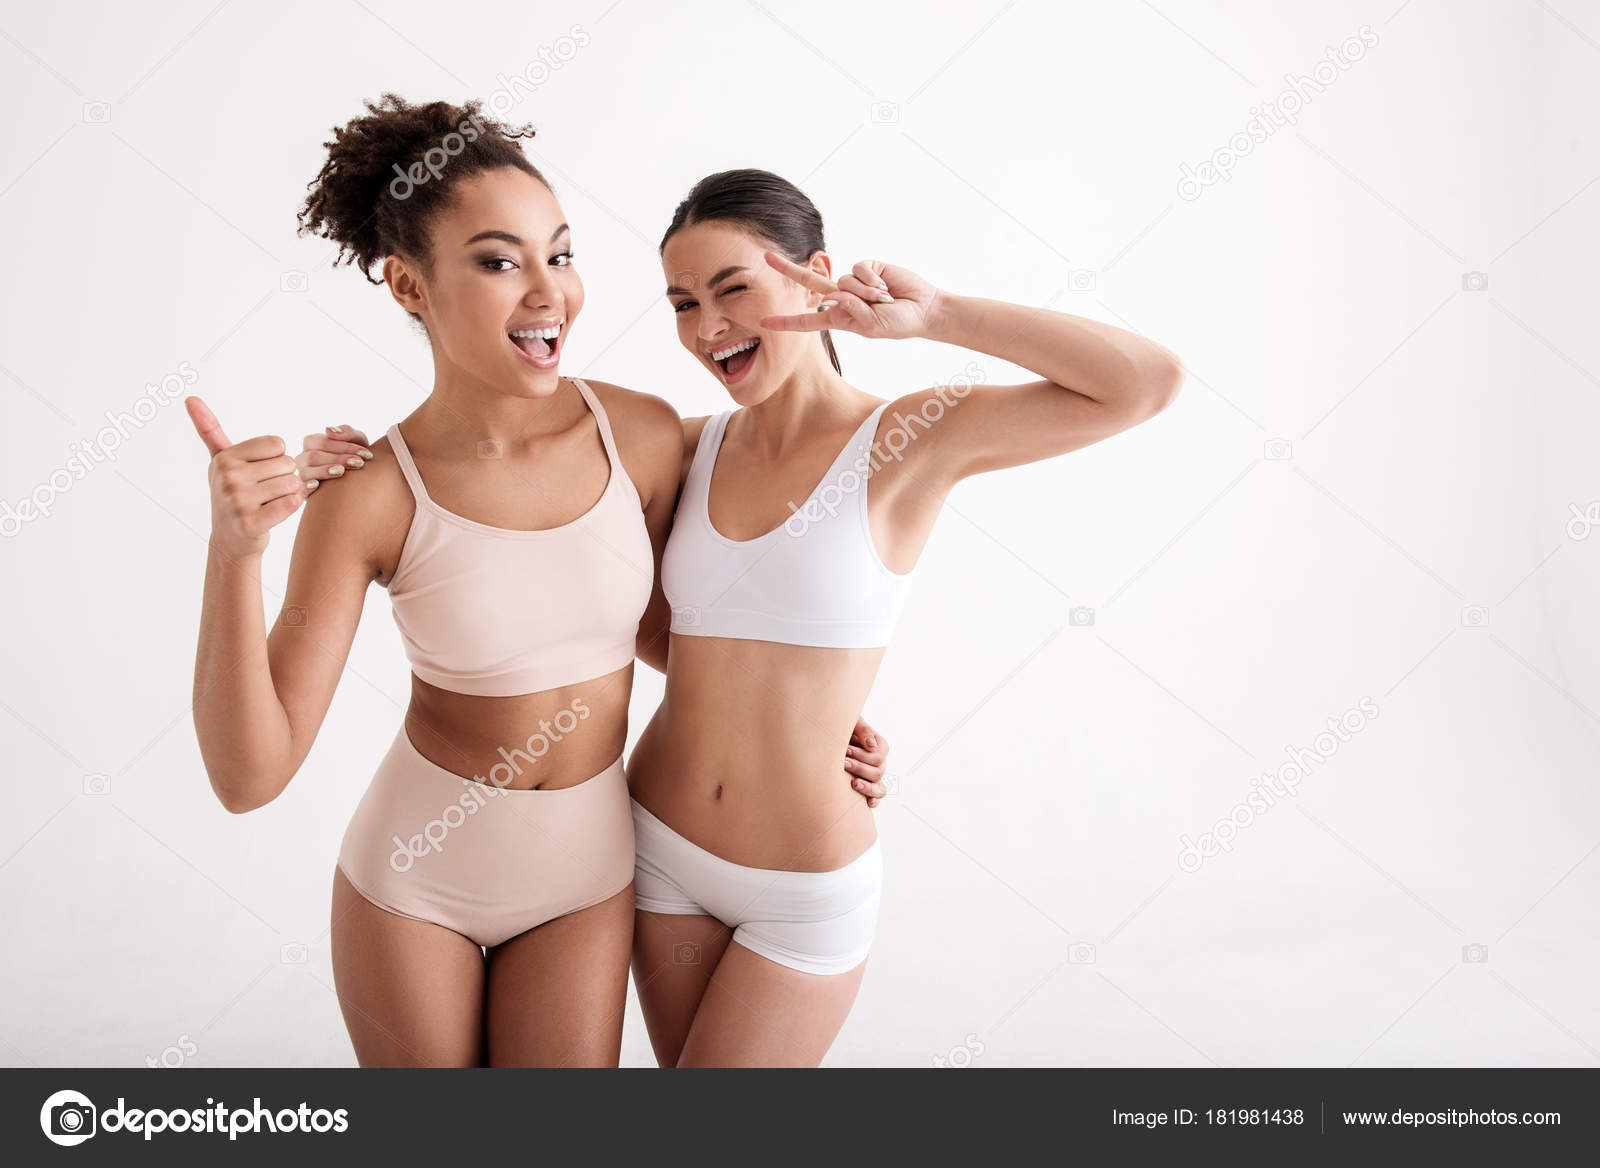 Portrait of two smiling women in great shape wearing tight underwear. They  are hugging and looking at camera with joy. Copy space in right side.  Isolated on background Photos